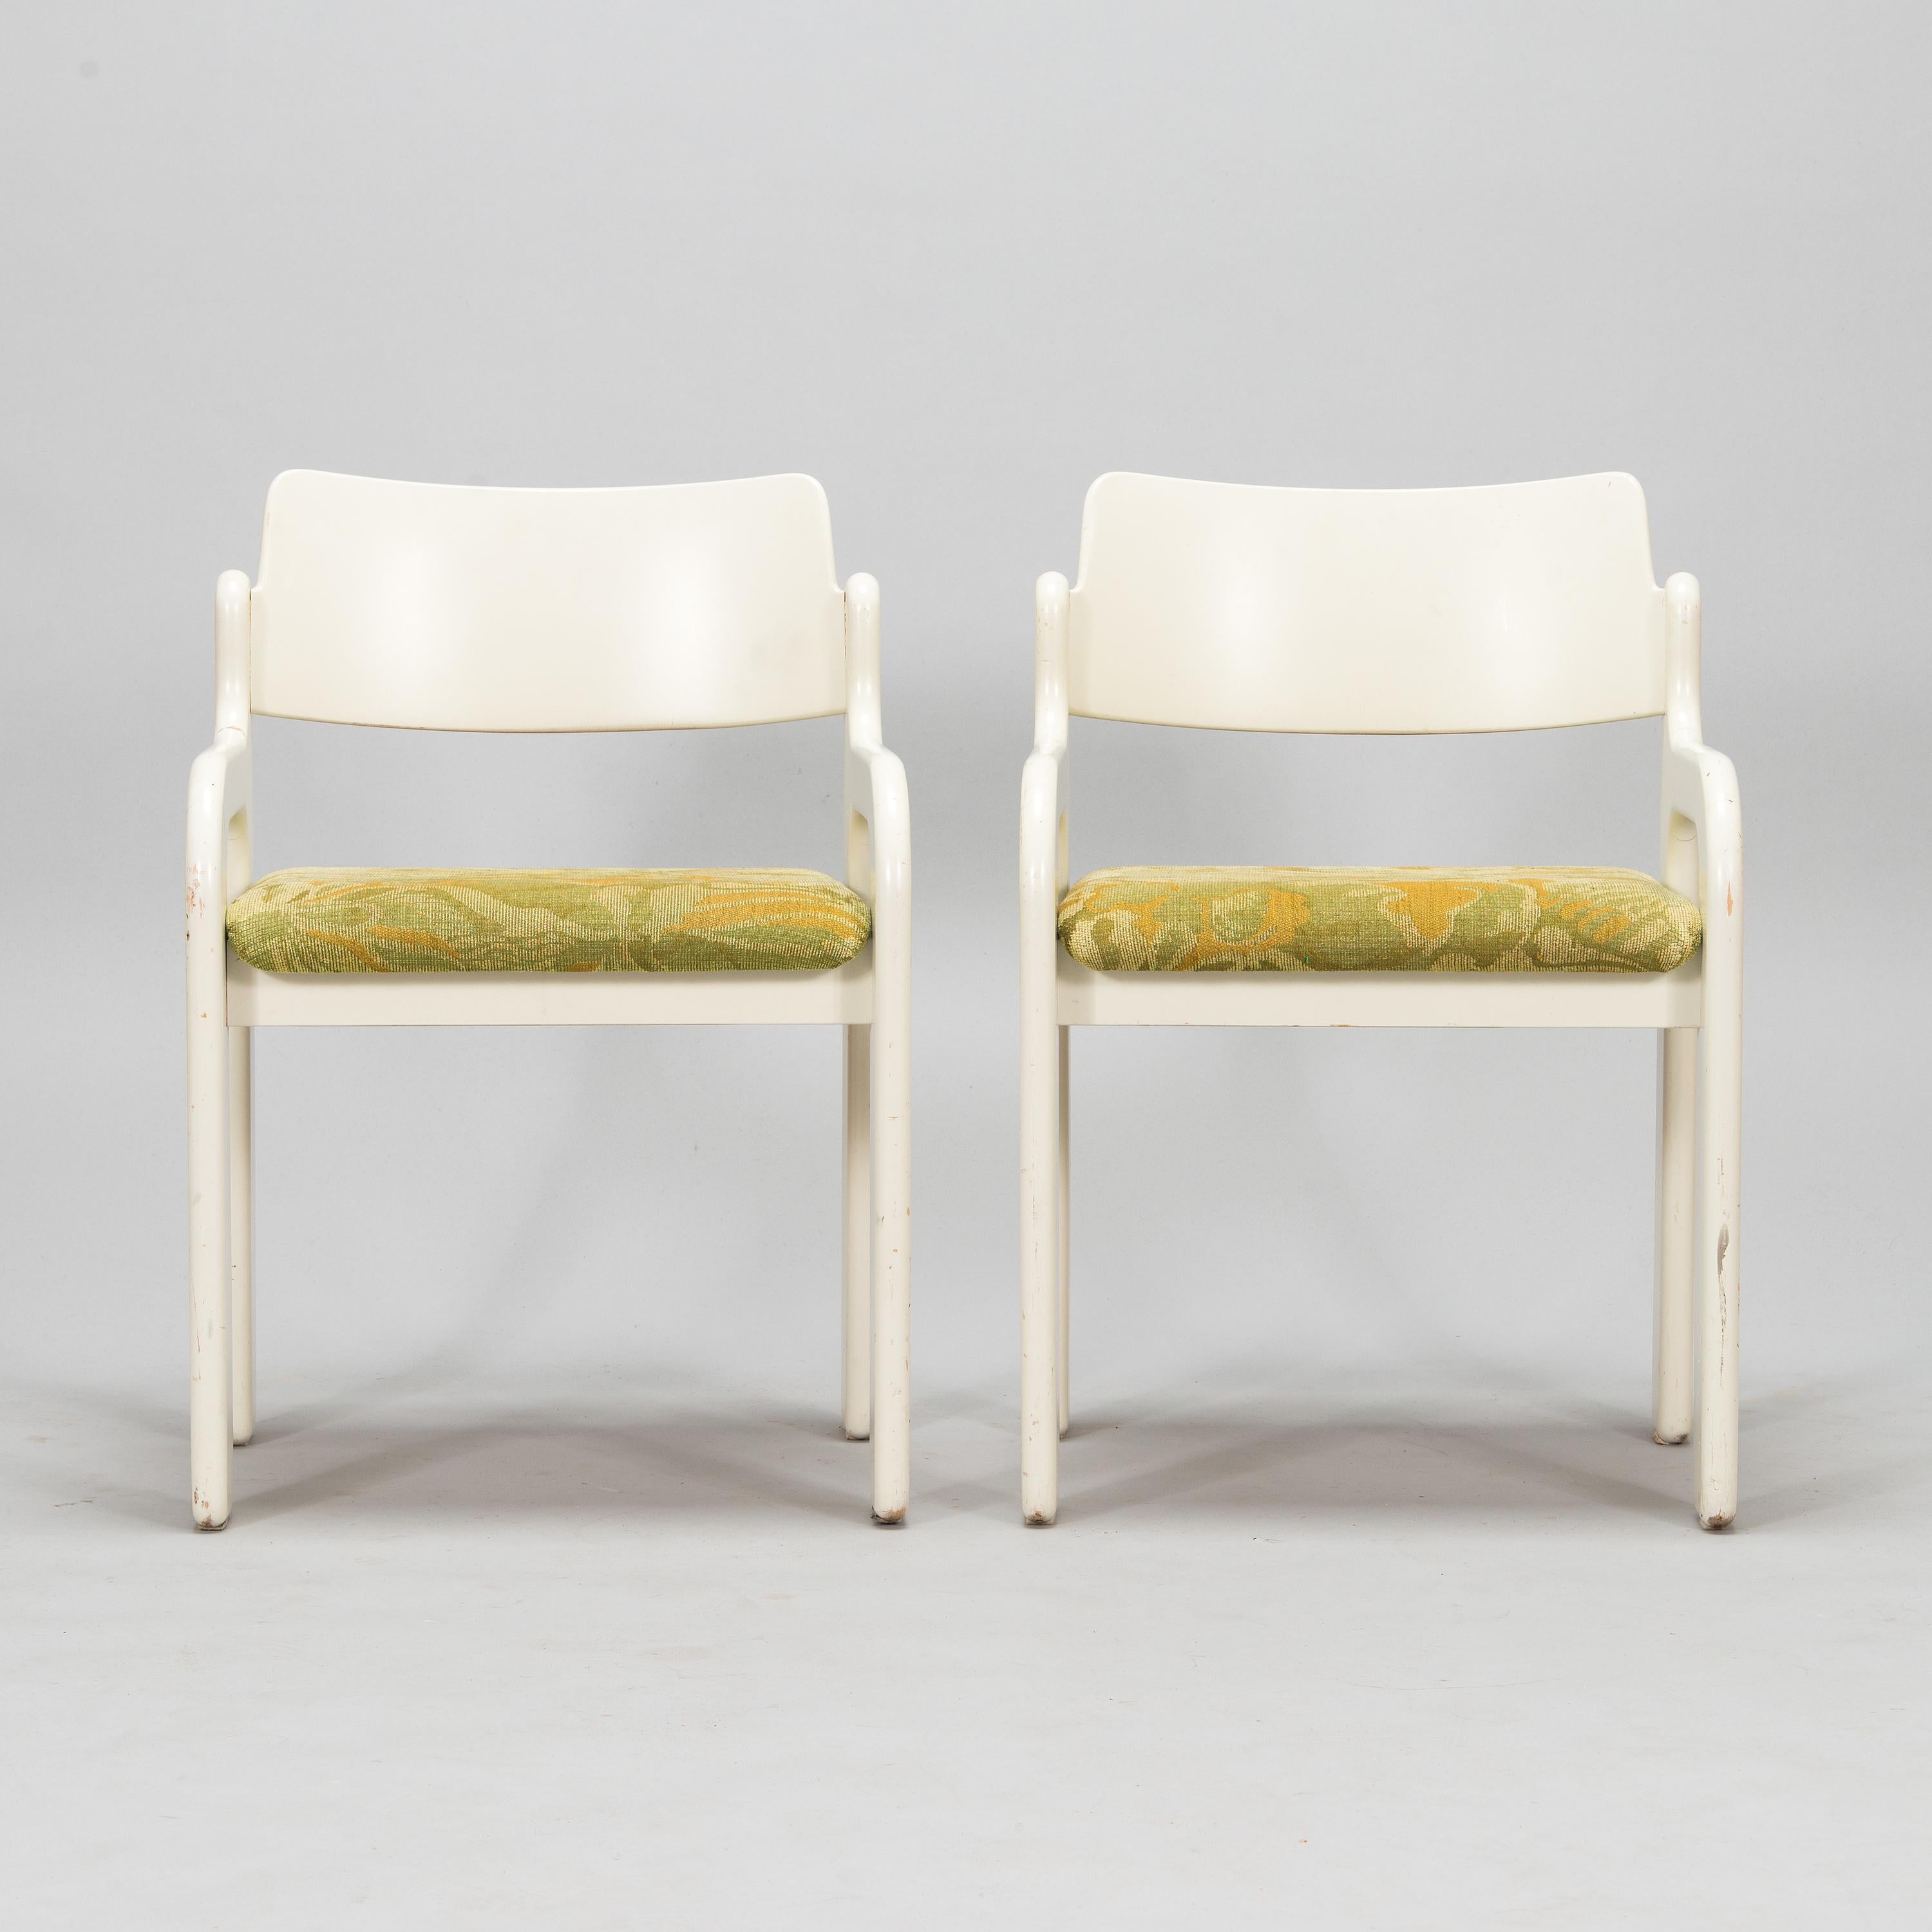 Mid-Century Modern Eero Aarnio 4 Chairs Model Flamingo for Asko Finland Marked, 1970s For Sale